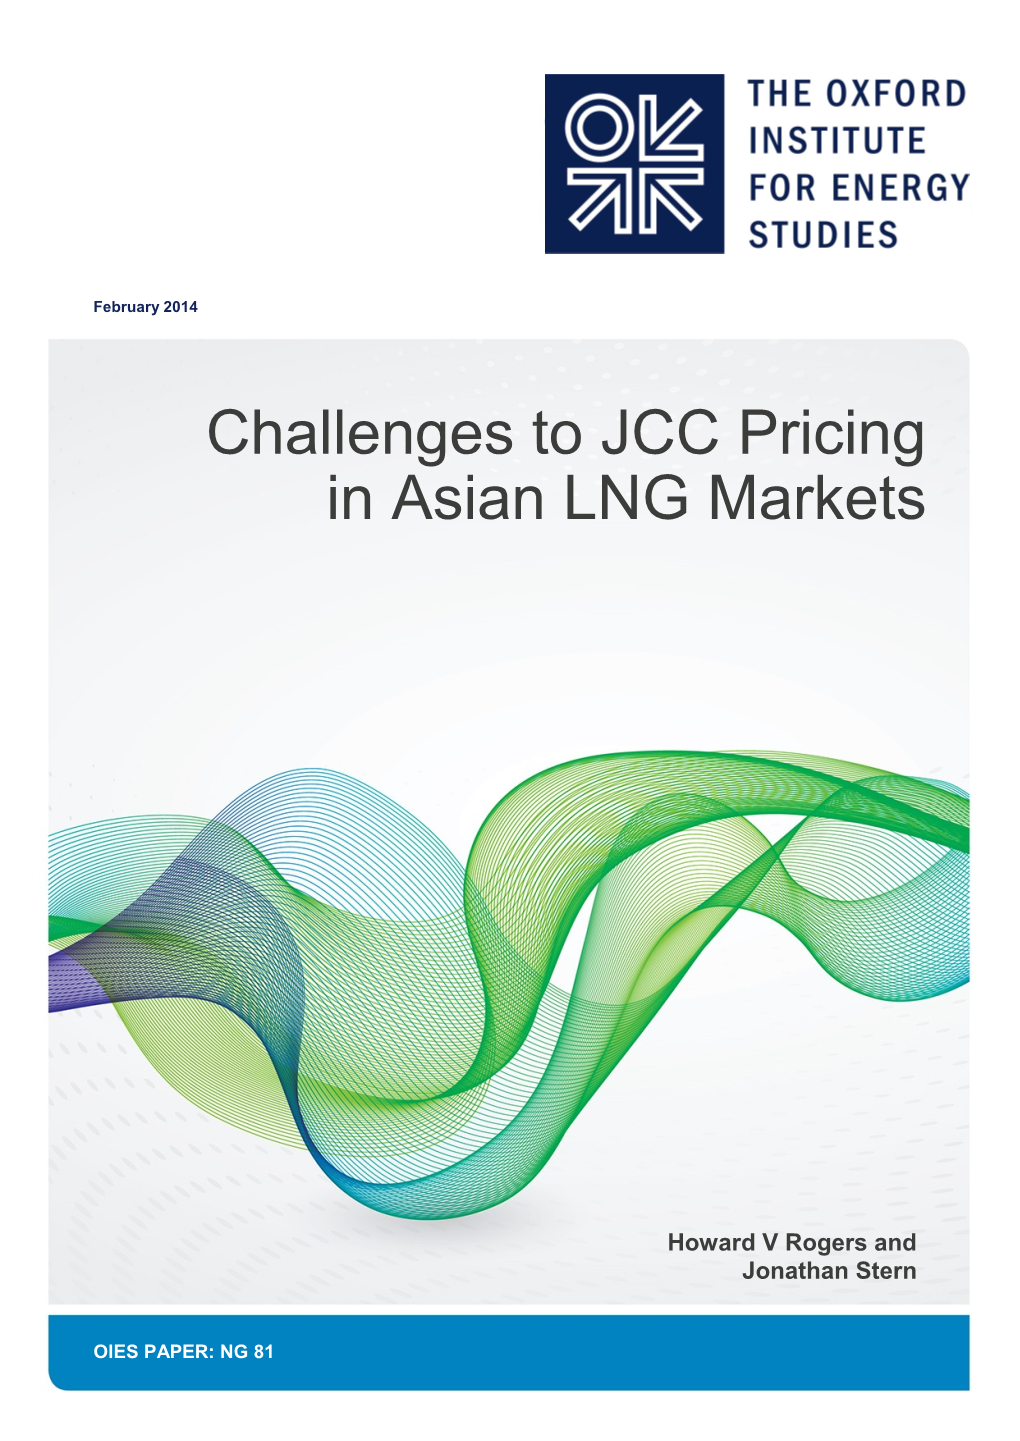 Challenges to JCC Pricing in Asian LNG Markets